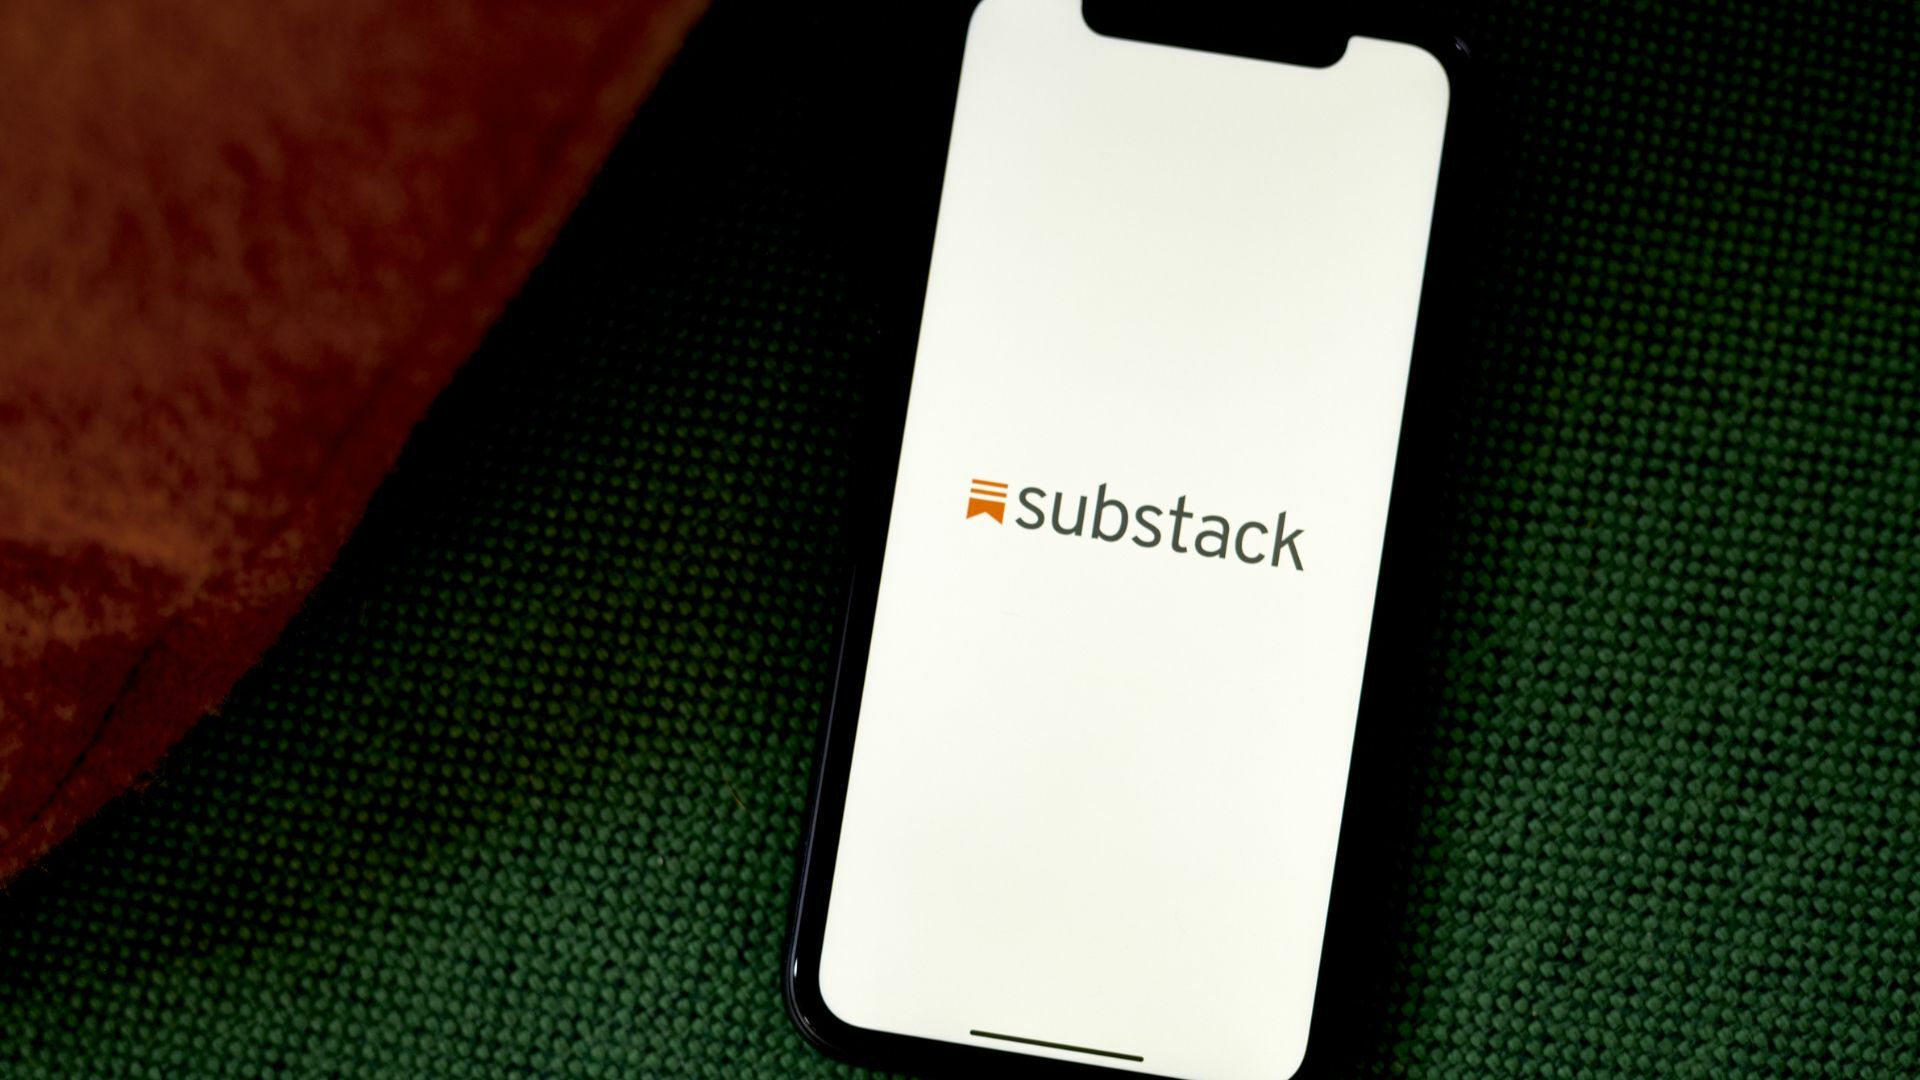 The Substack logo on a smartphone.